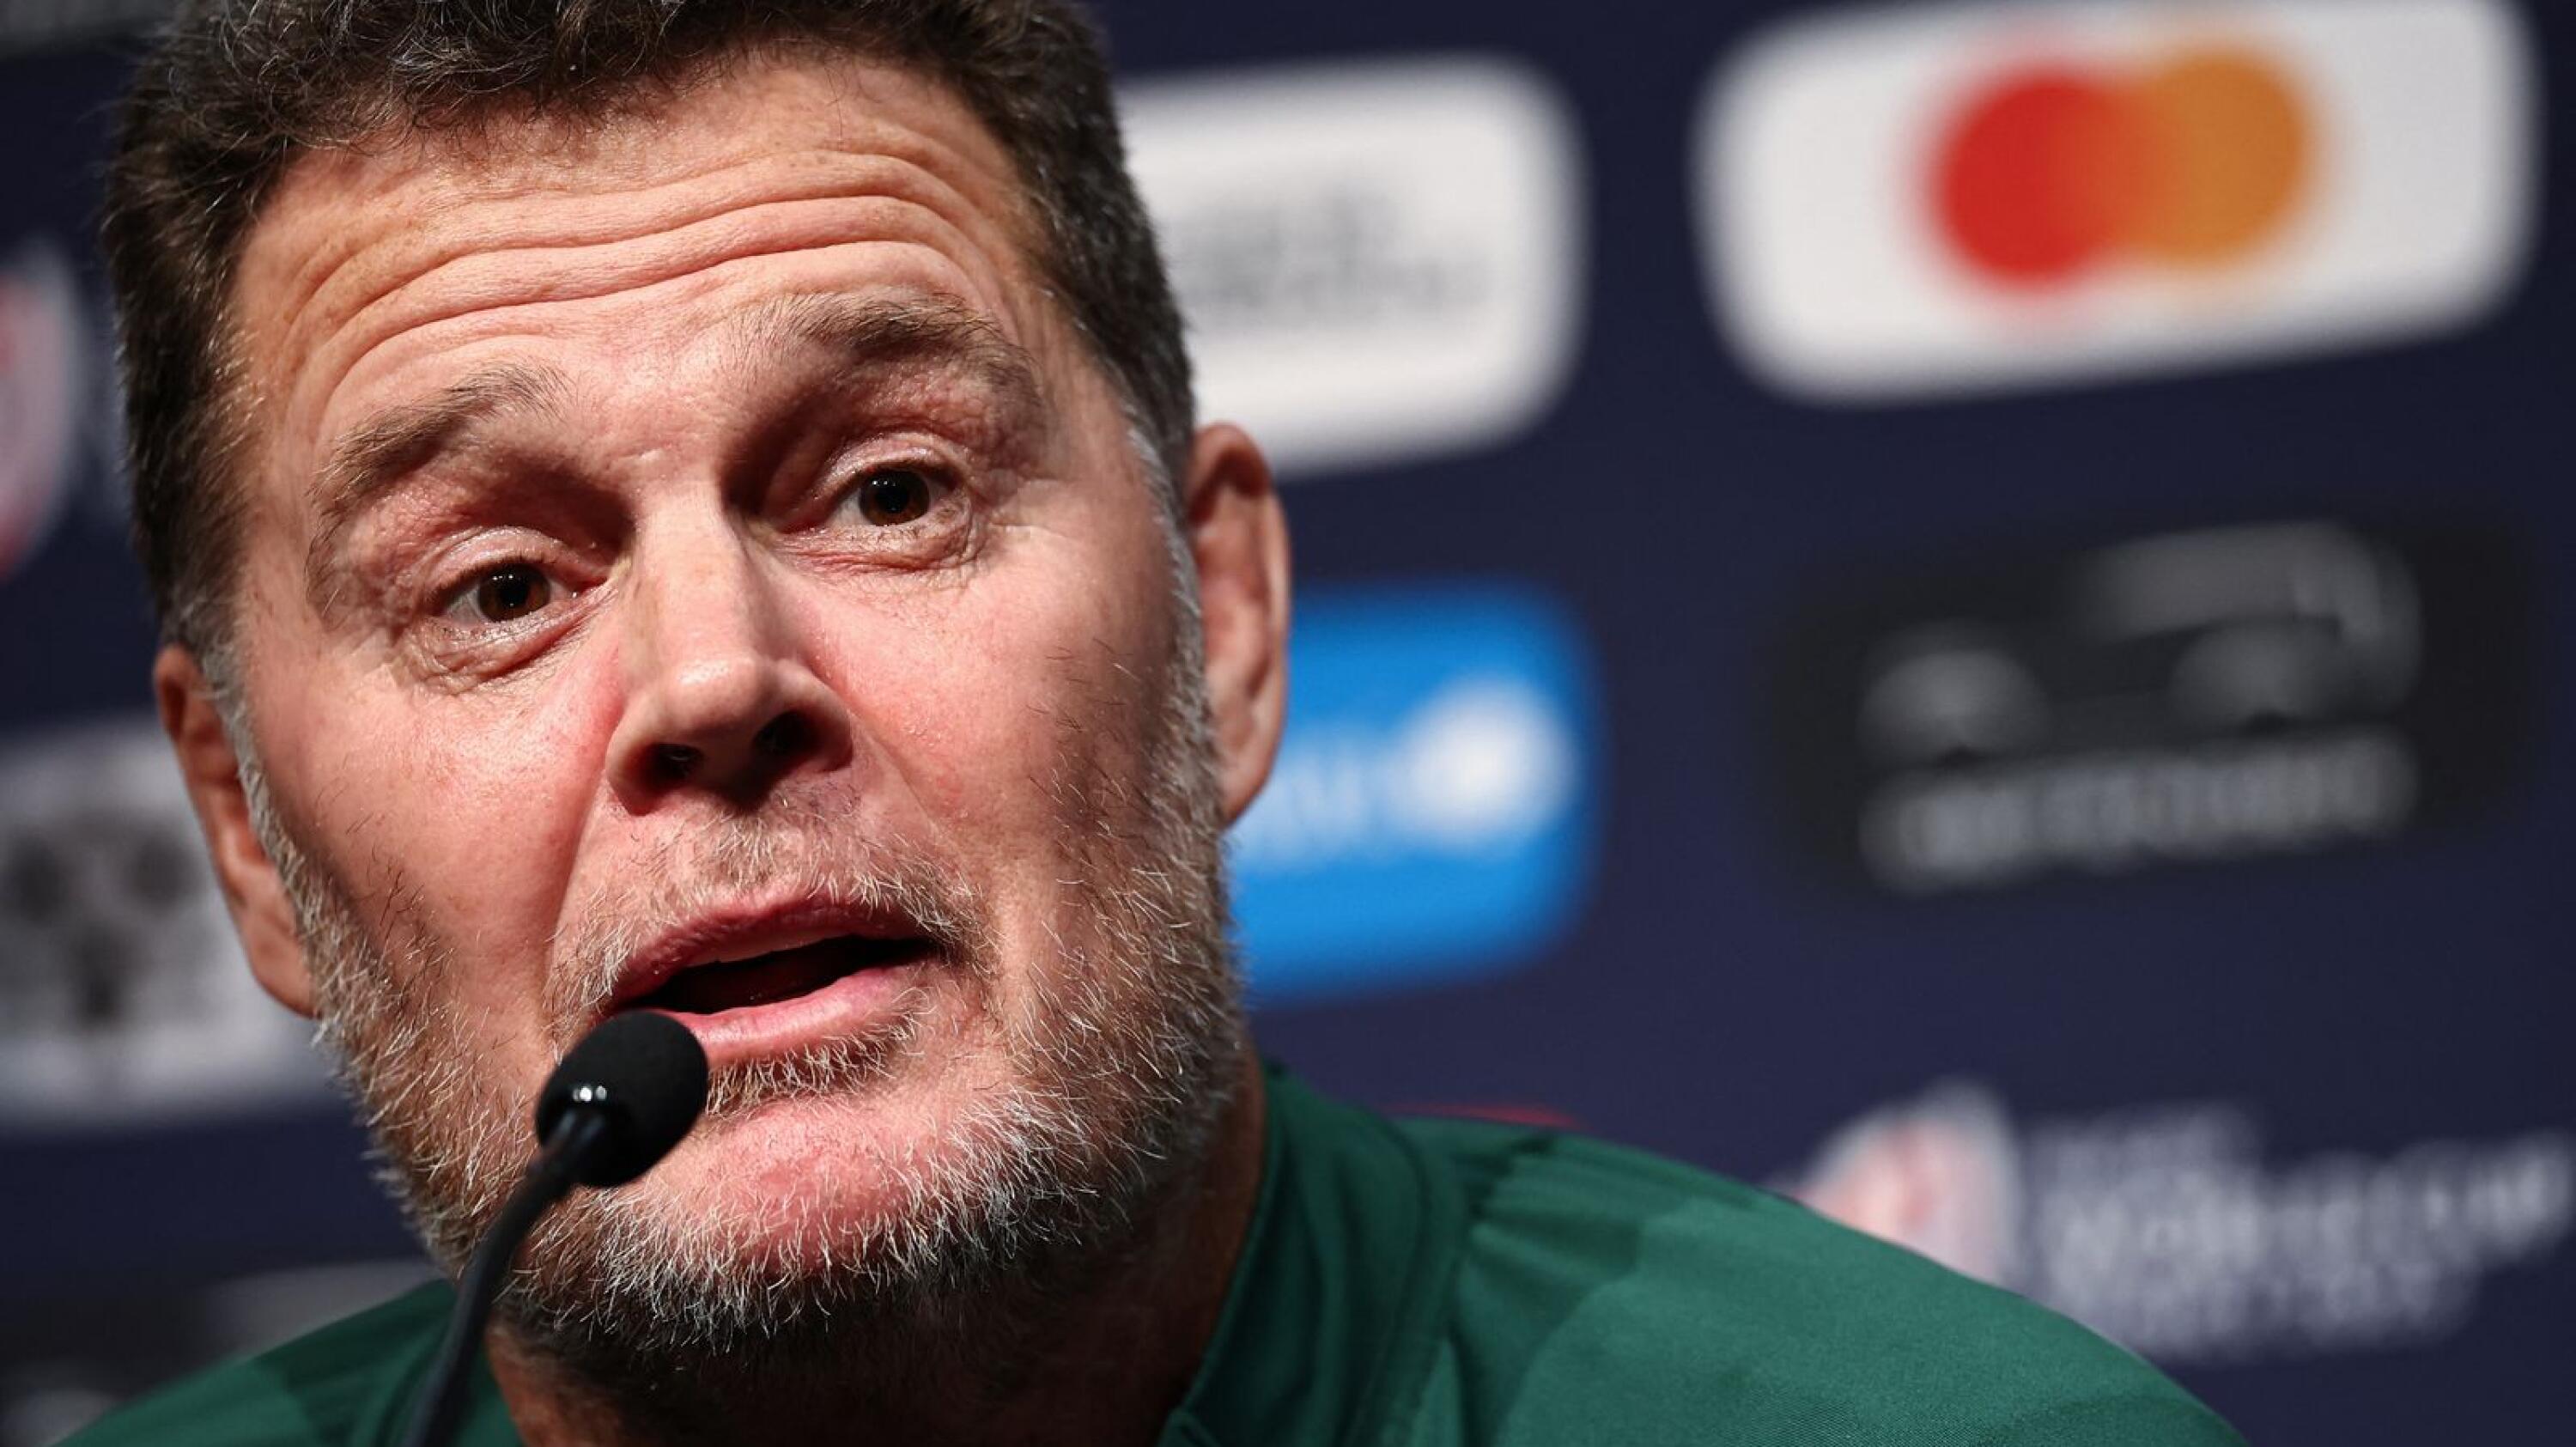 Rassie Erasmus attends a press conference in Presles, north of Paris, on Tuesday